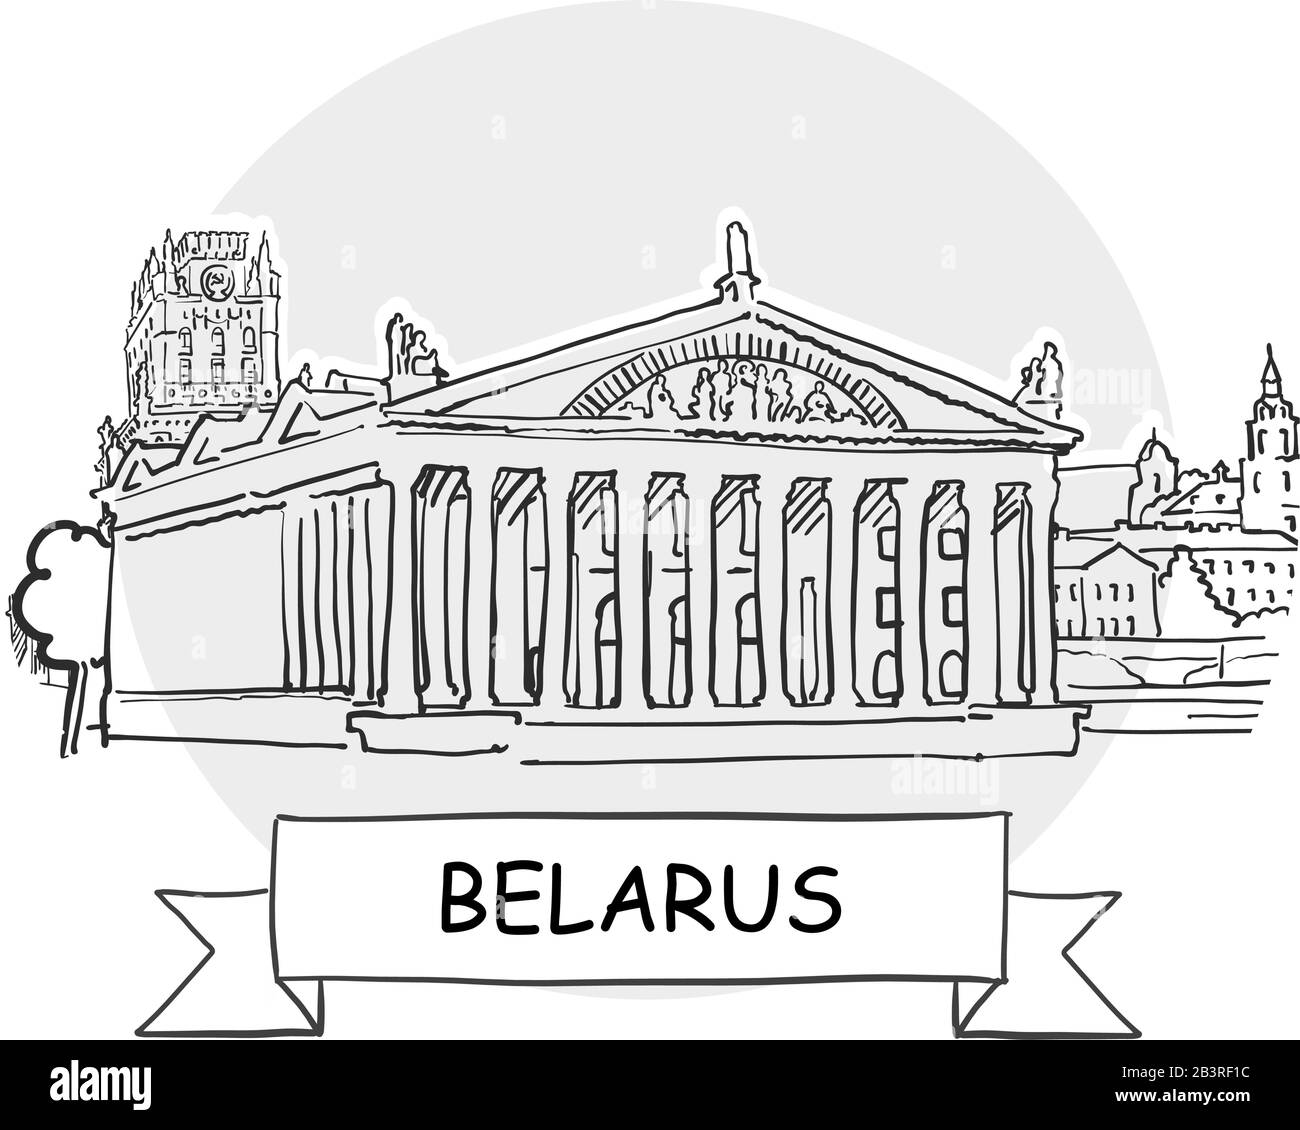 Belarus Hand-Drawn Urban Vector Sign. Black Line Art Illustration with Ribbon and Title. Stock Vector